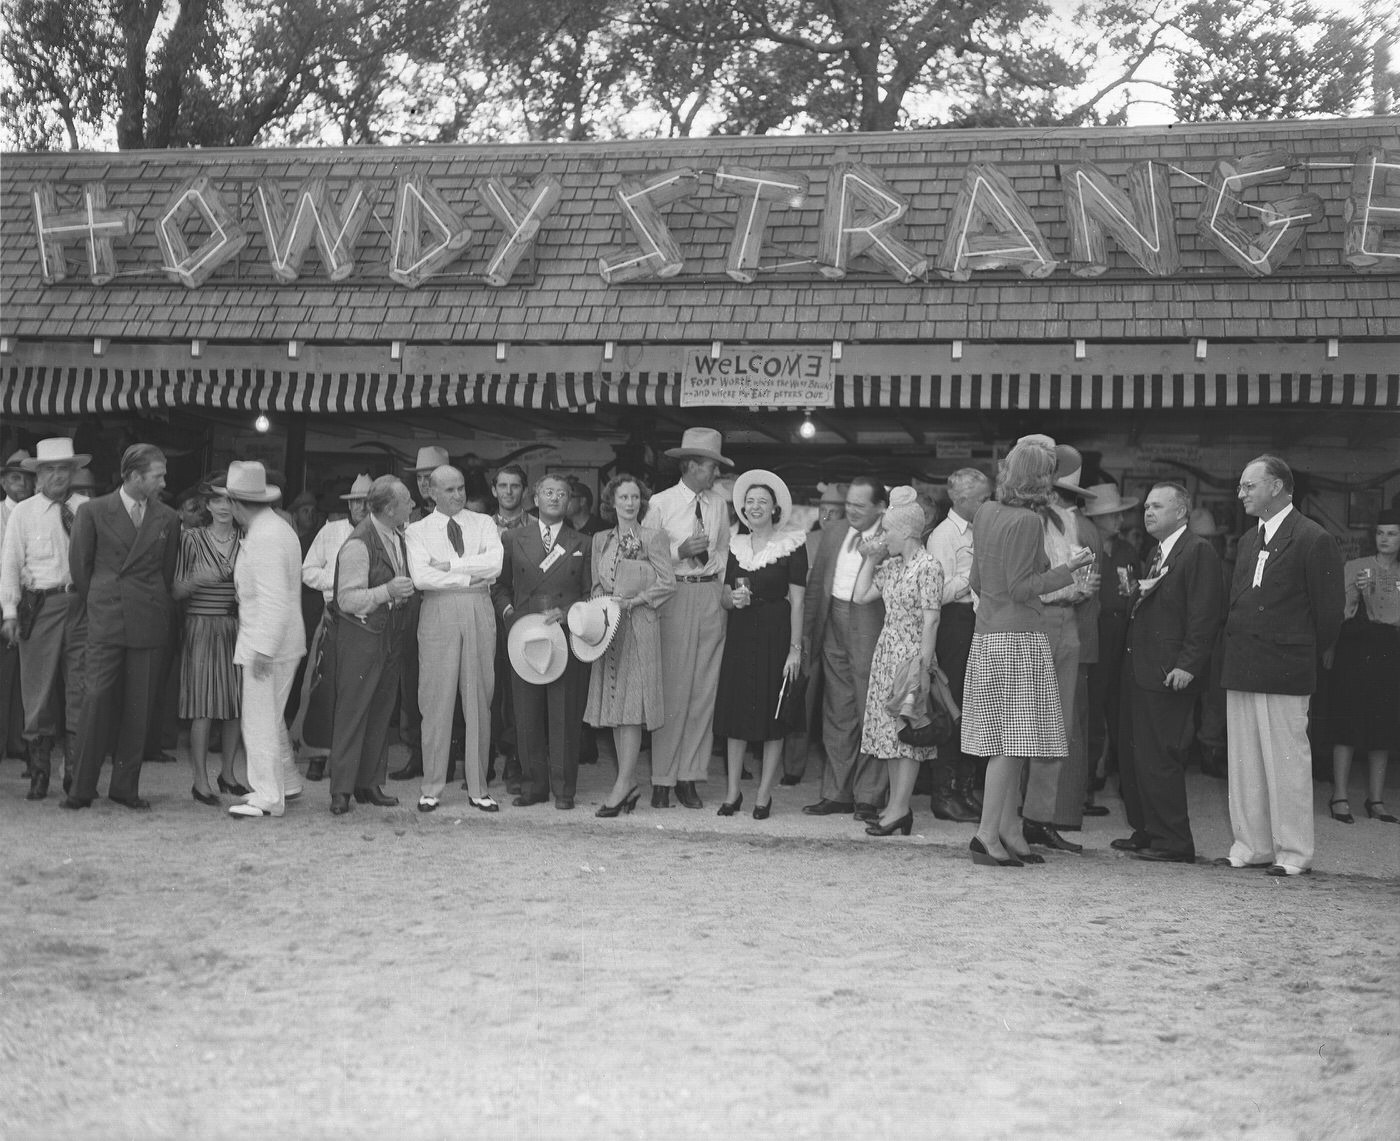 A group poses in front of a "Howdy Stranger" sign at Shady Oak Farm, 1940